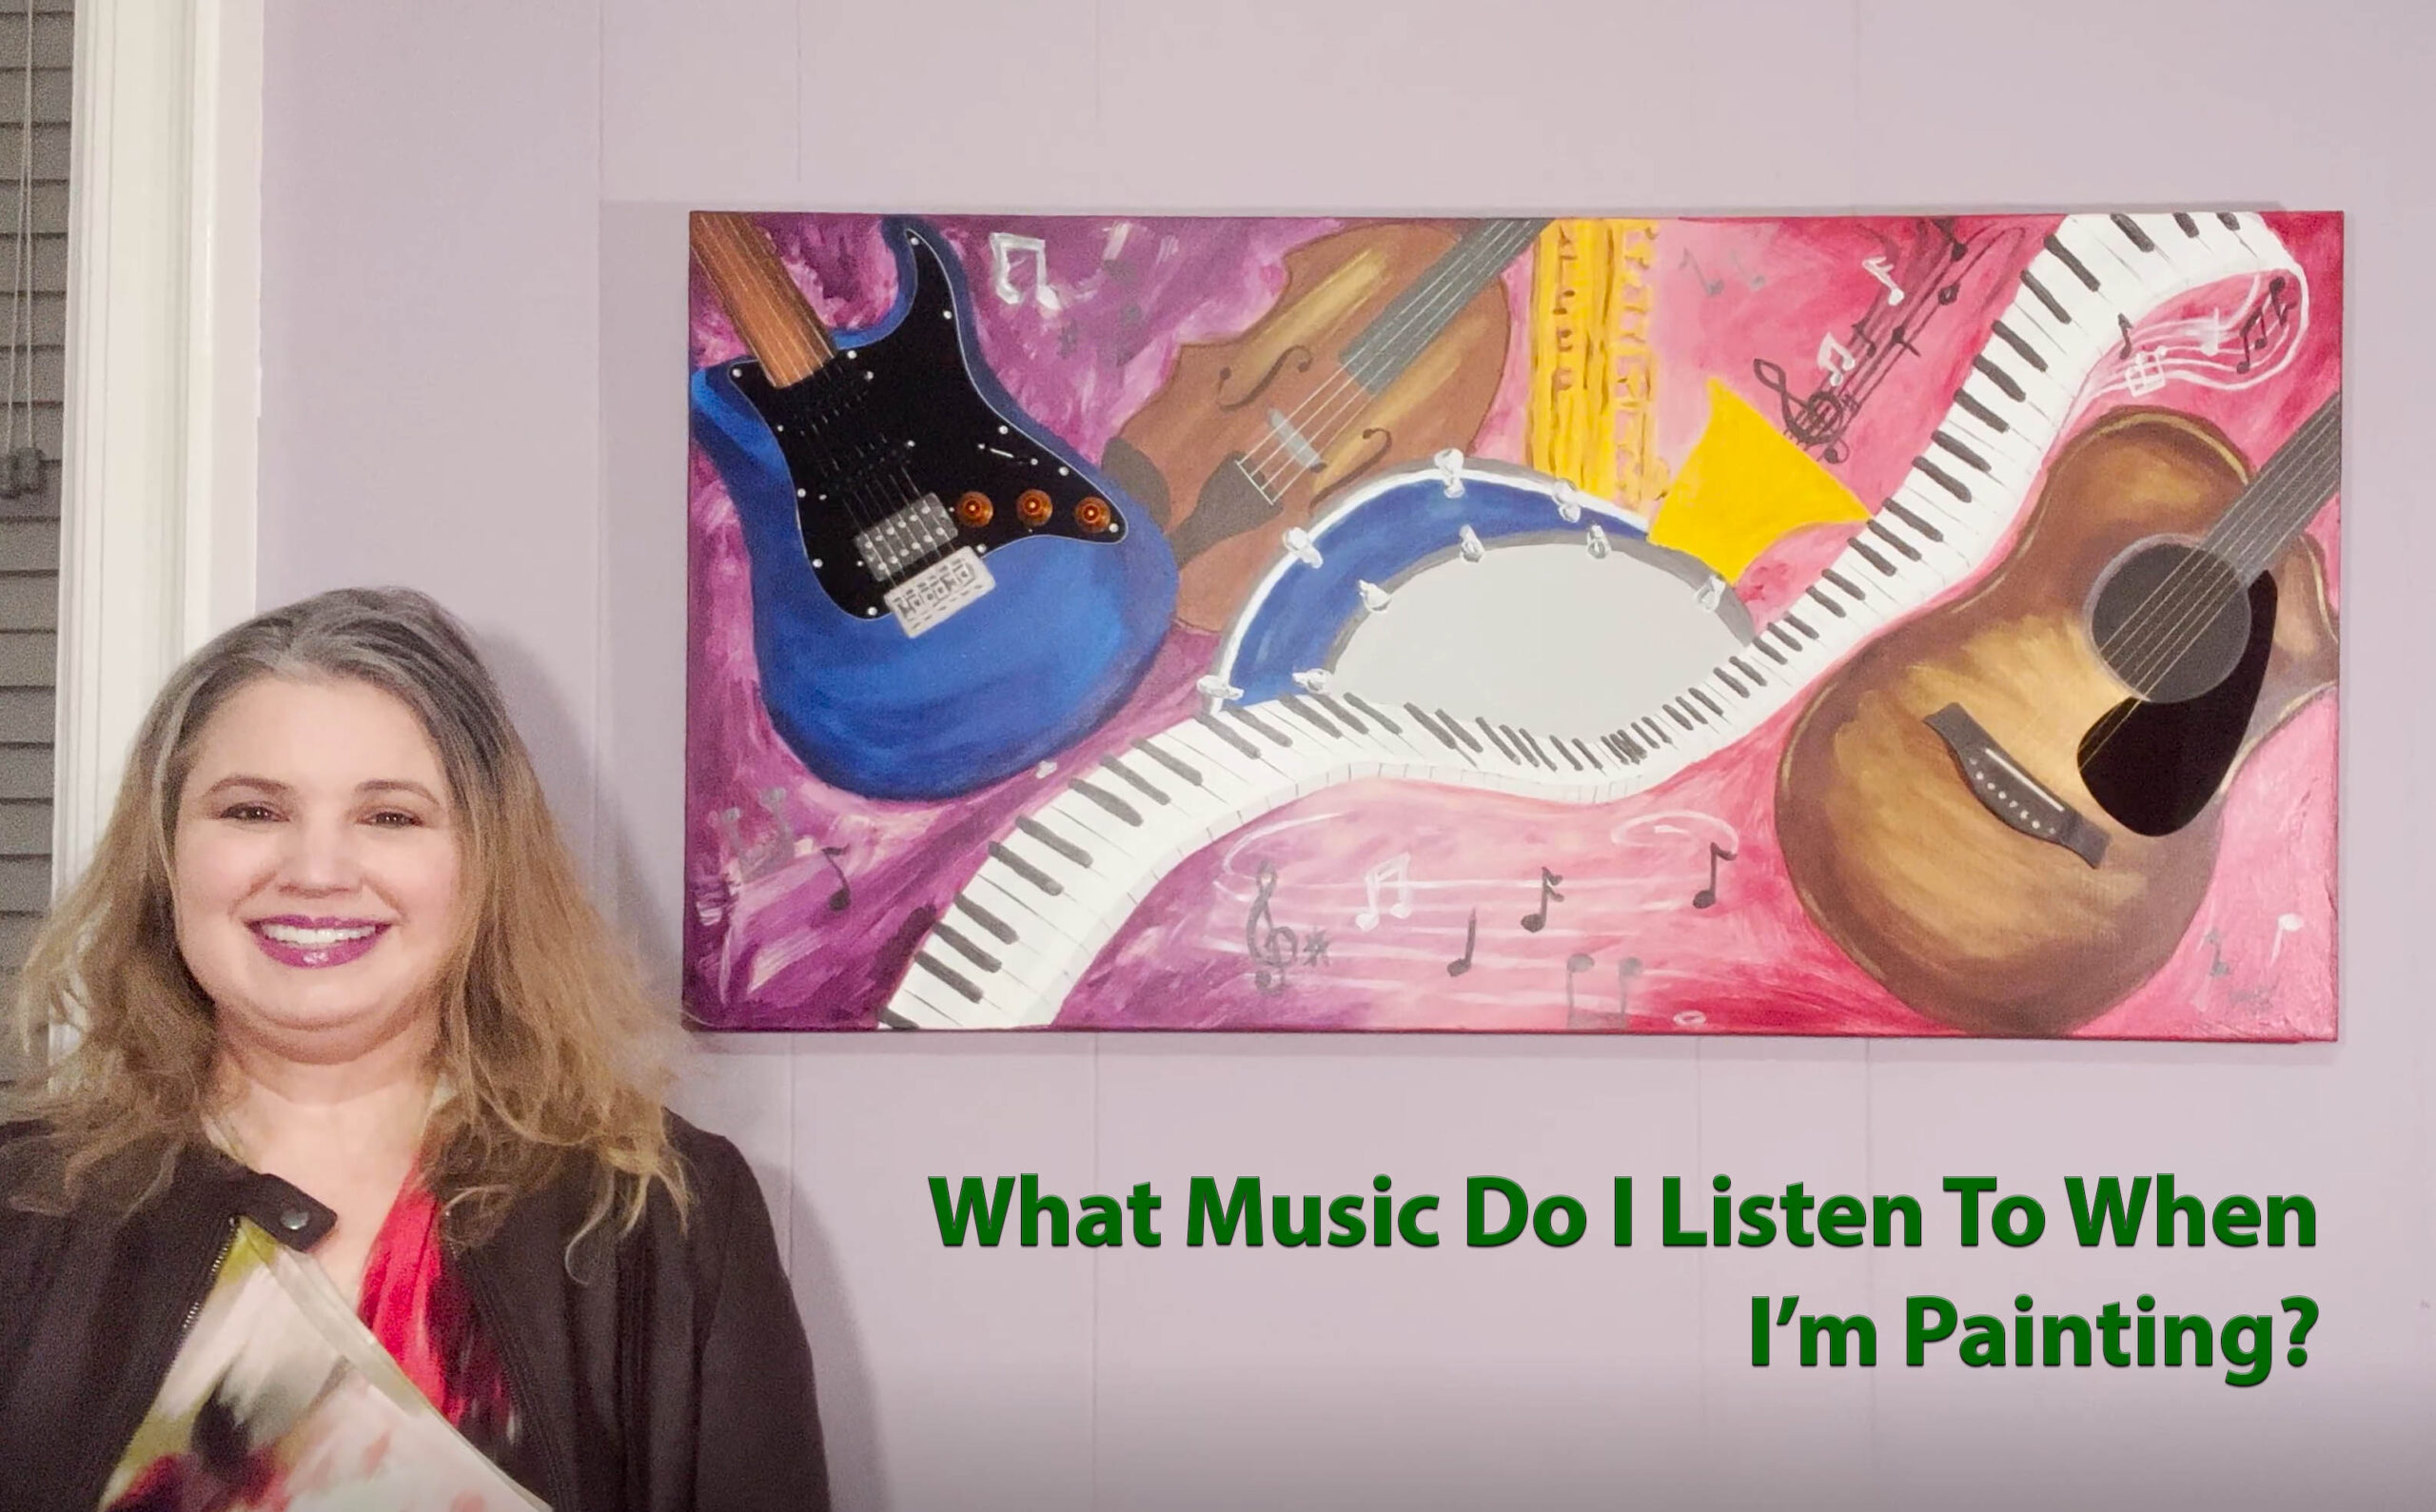 Artist Q&A of the Week: What Type of Music Do I Listen To When I’m Painting?